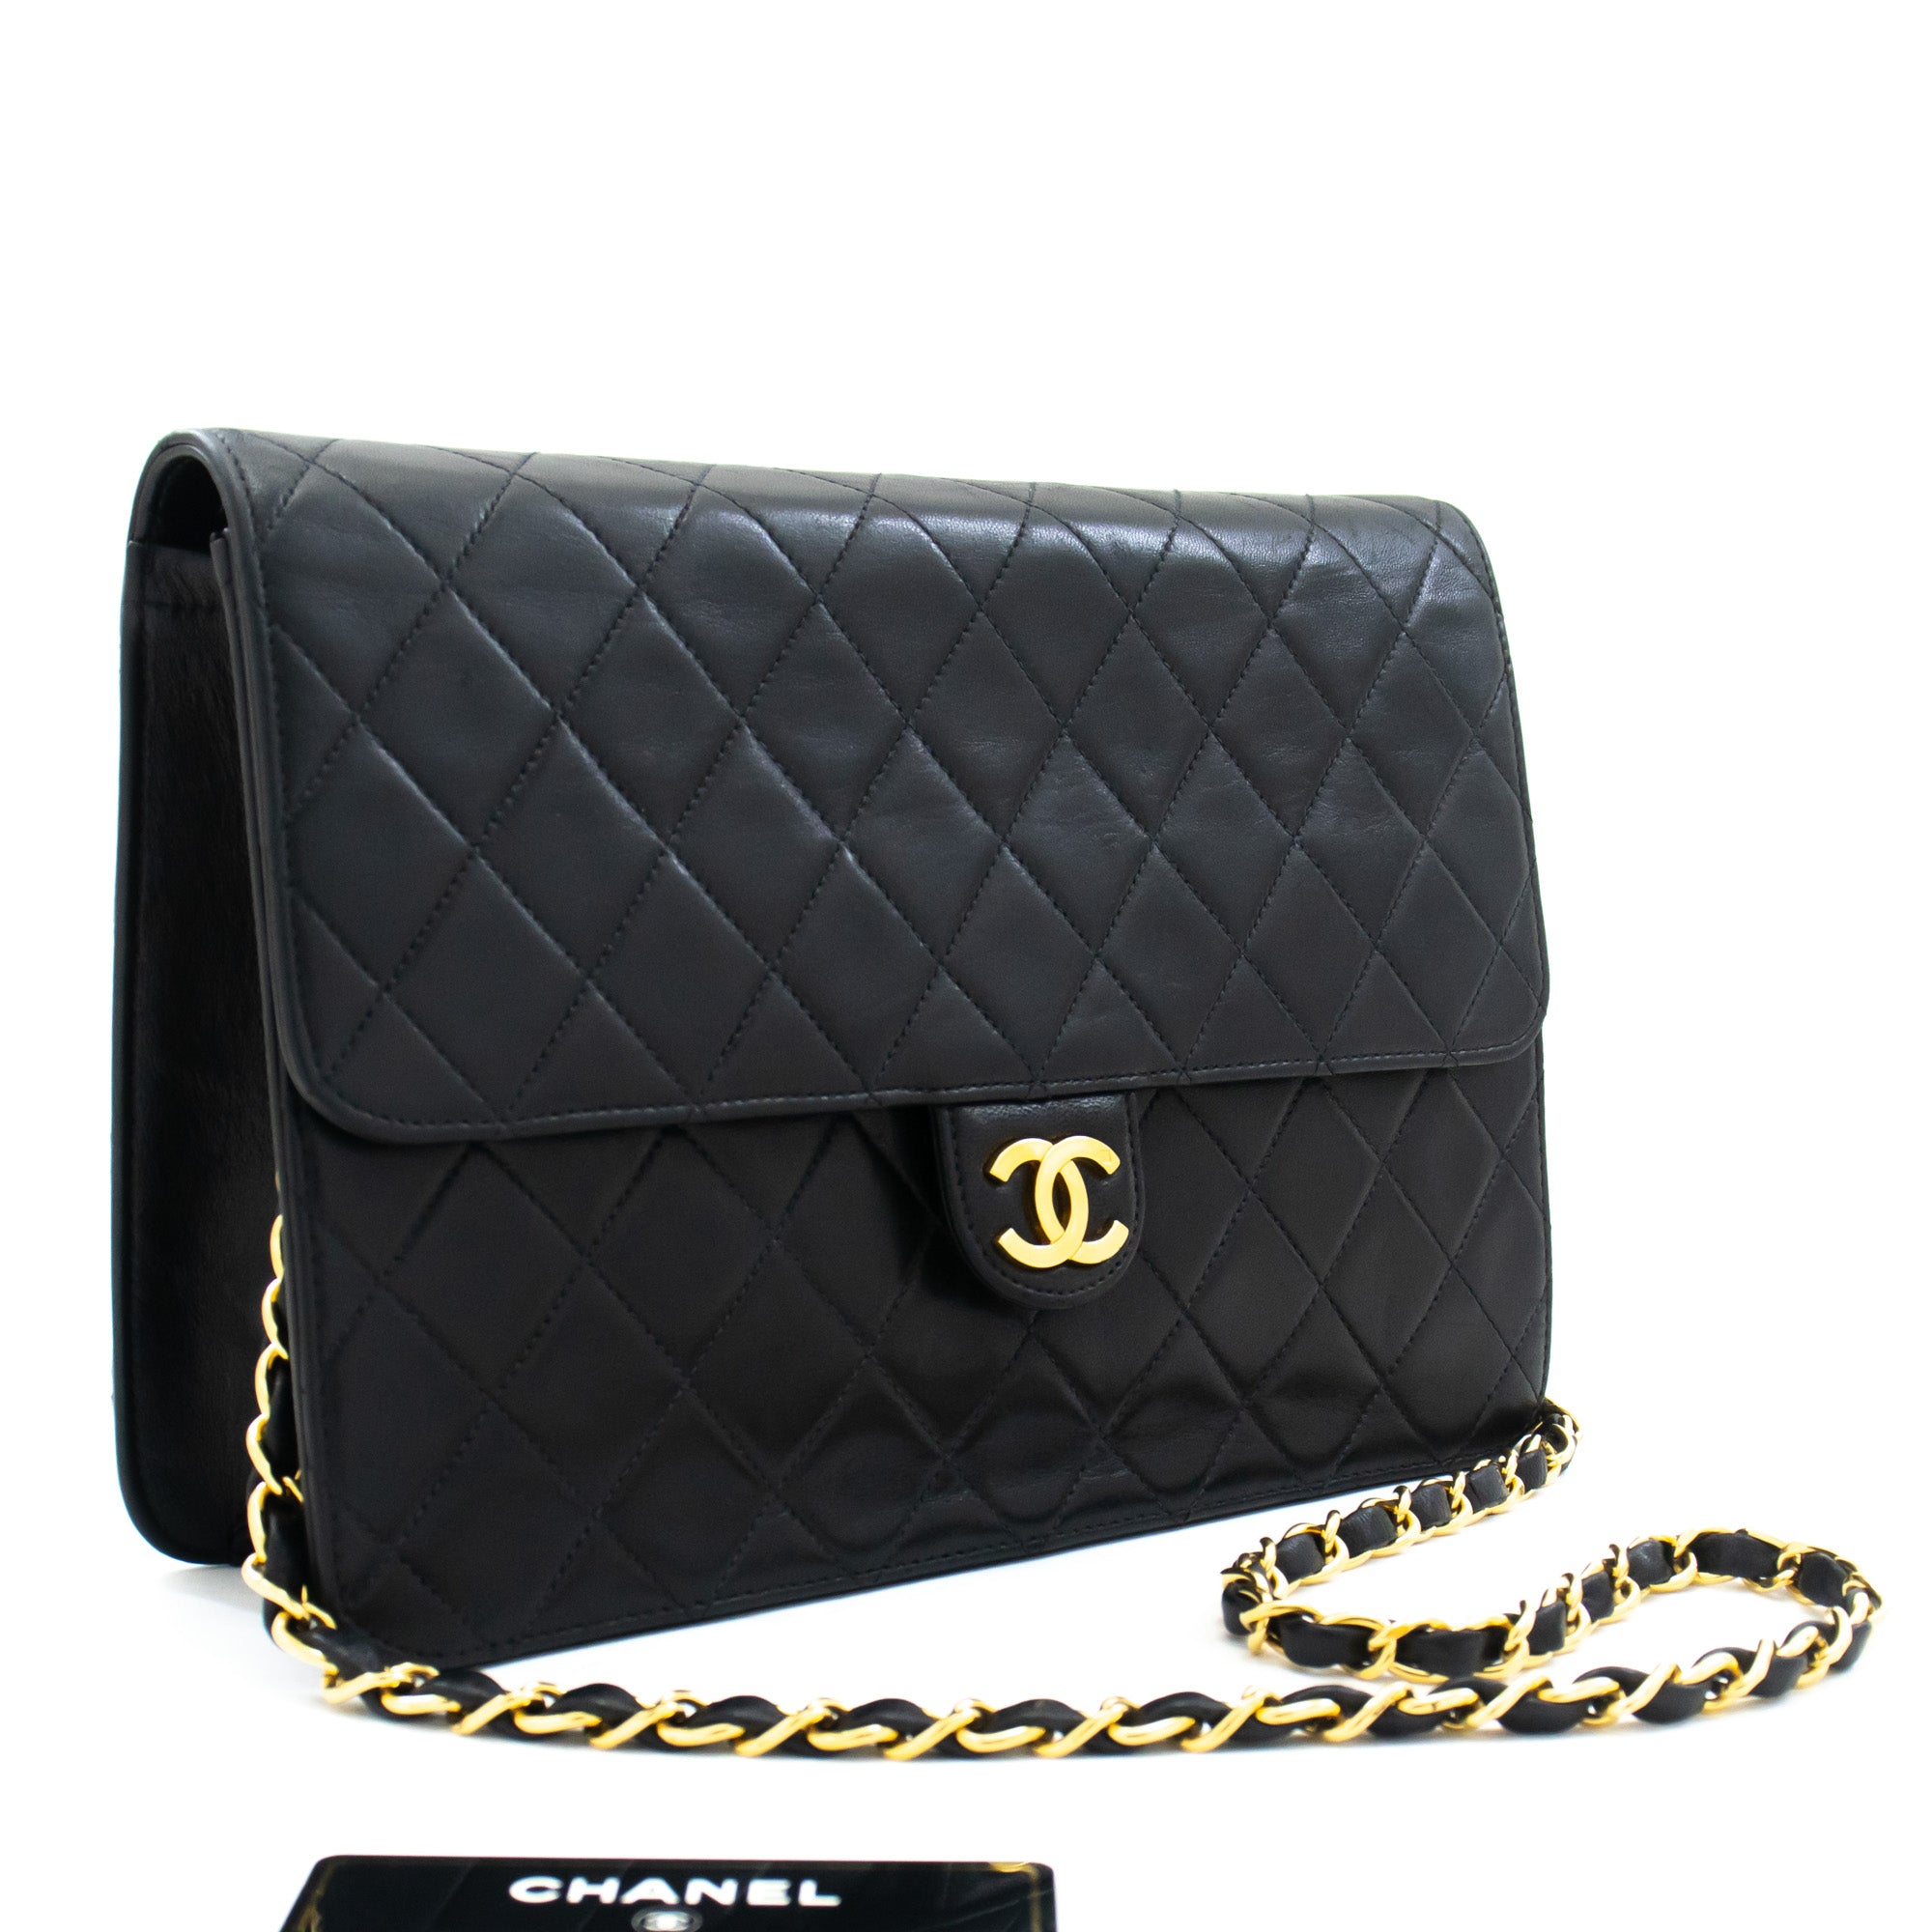 Chanel Chain Shoulder Bag Clutch Black Quilted Flap Lambskin Purse L27